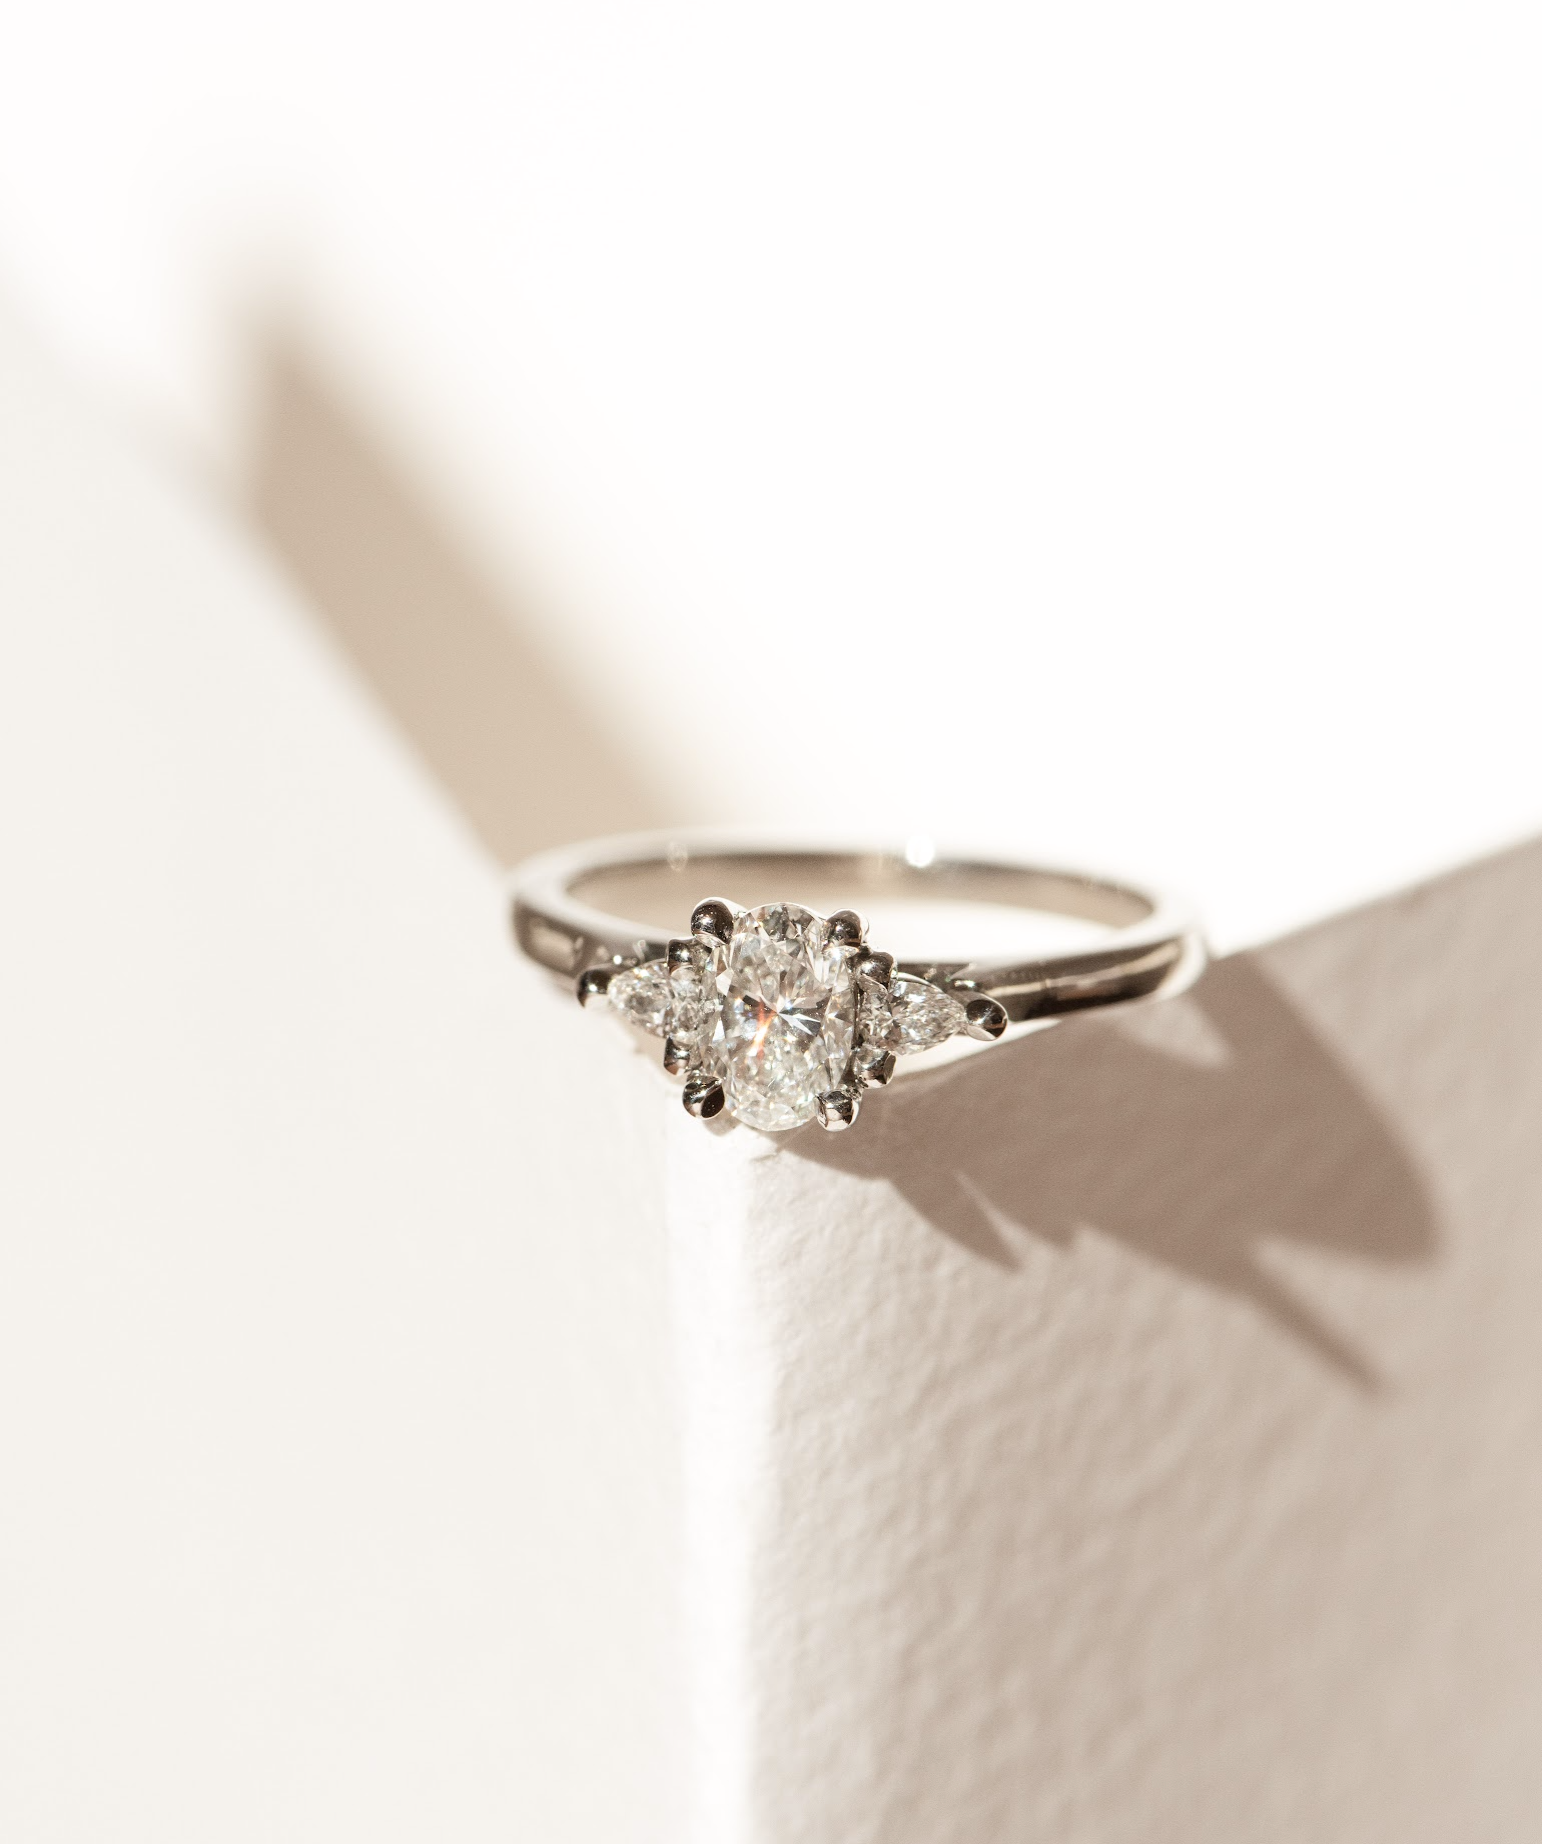 Dean & Dust - Bespoke Design - Three Stone Engagement Ring with Oval centre stone and Pear Diamond Side Stones